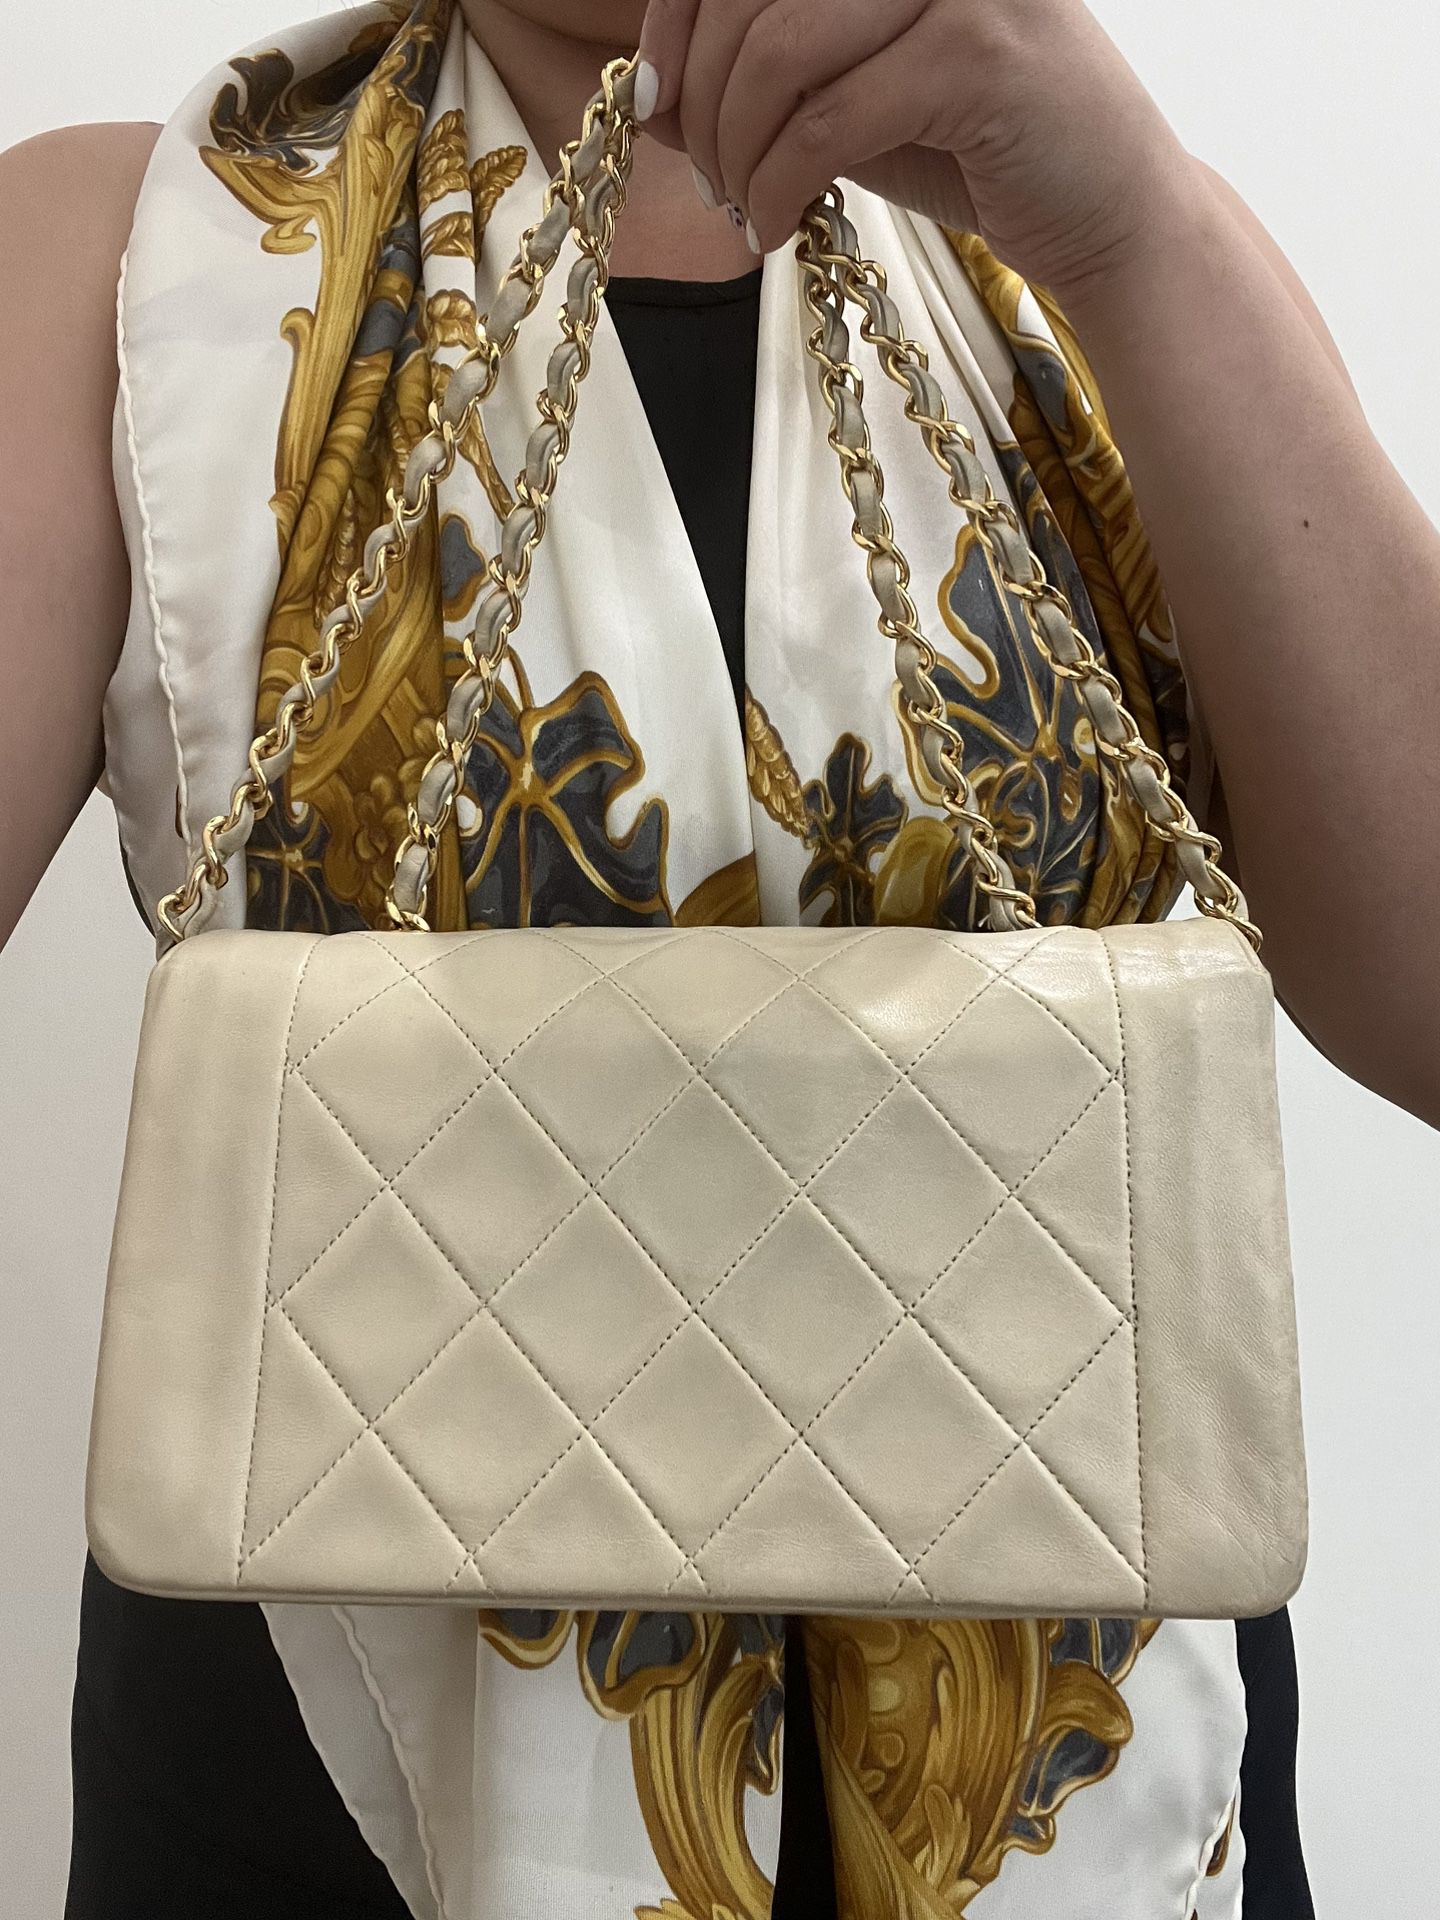 Vintage Chanel Diana Bag beige for Sale in Albany, CA - OfferUp